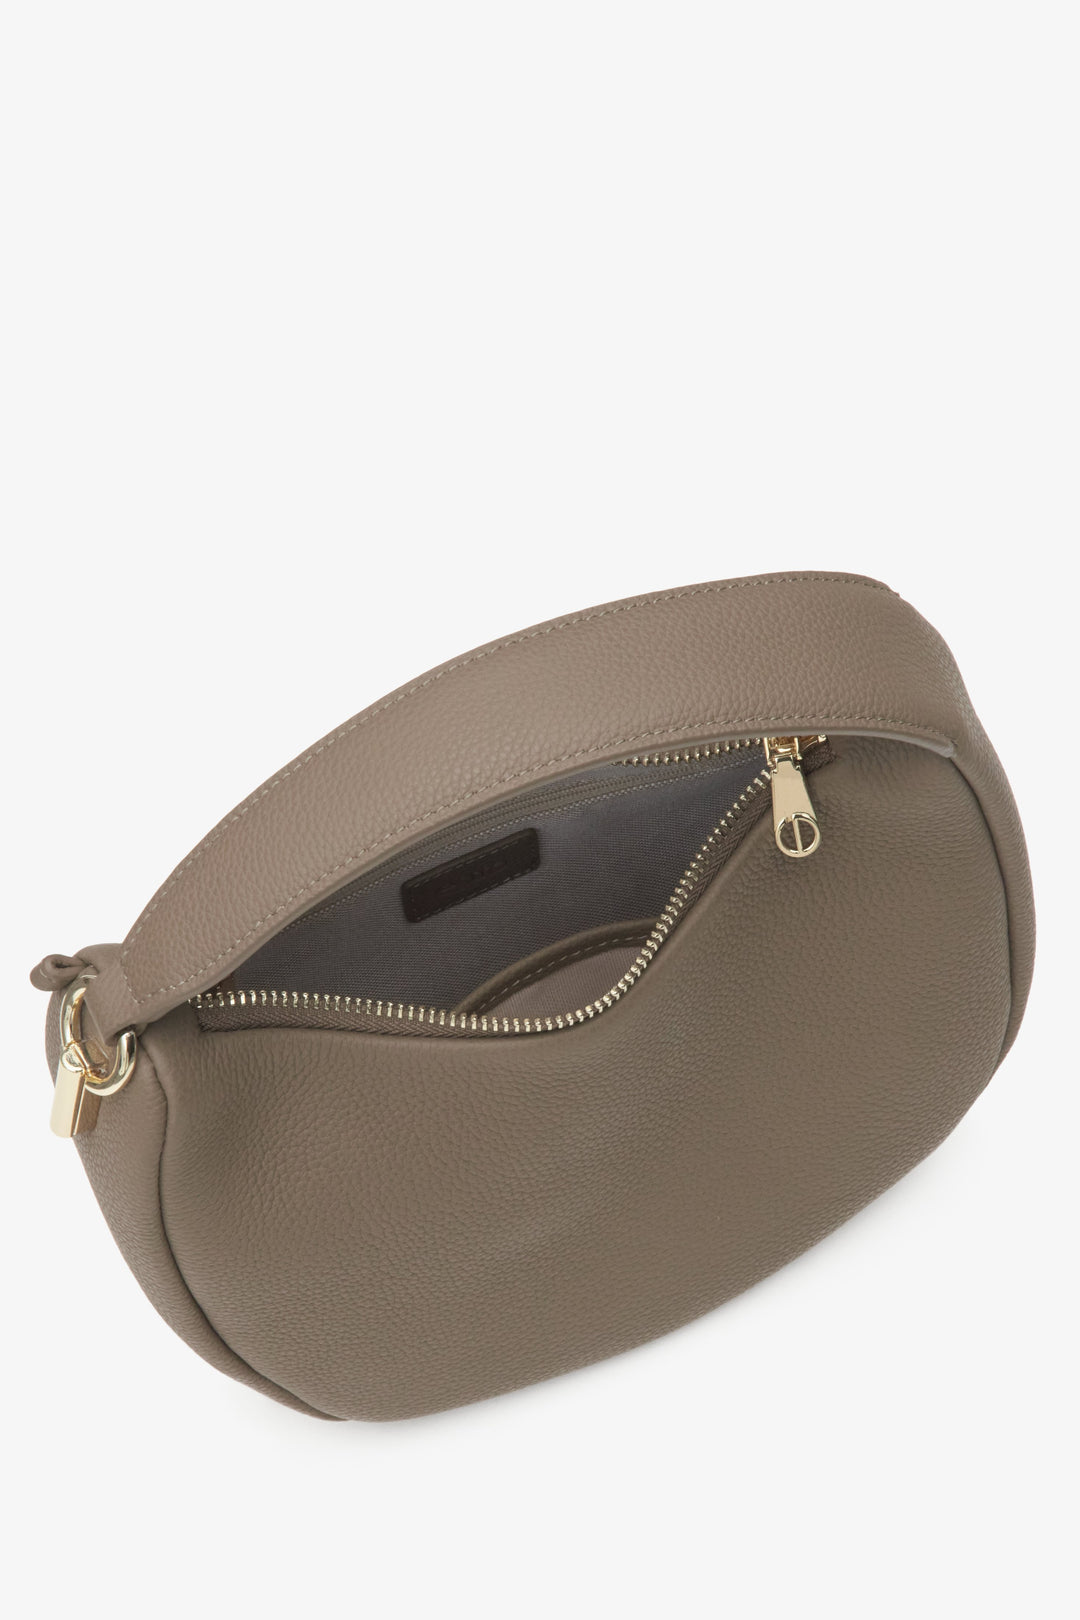 Close-up of the interior of the brown leather women's crescent-shaped handbag by Estro.